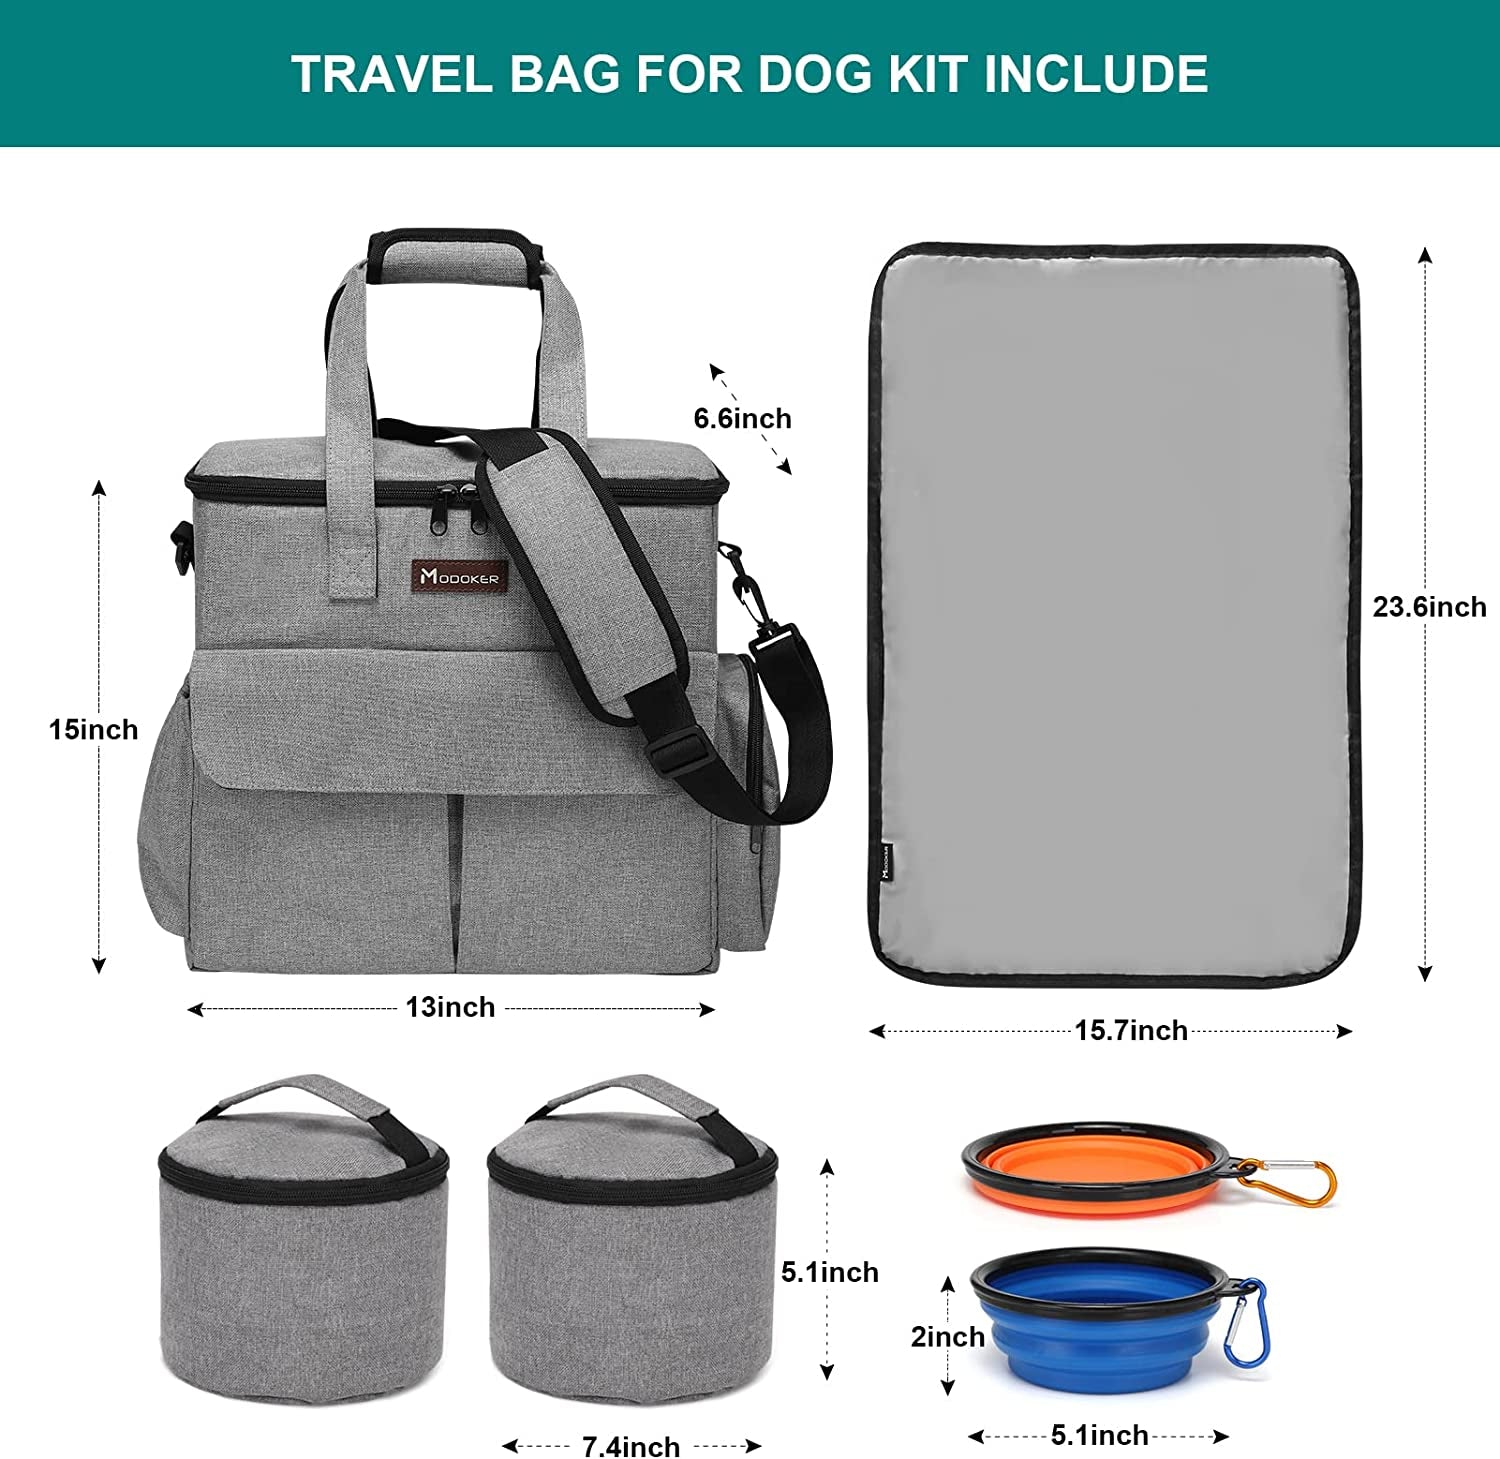 Dog Travel Bag, Weekend Pet Travel Set for Dog and Cat, Airline Approved Tote Organizer with Multi-Function Pockets (Grey)